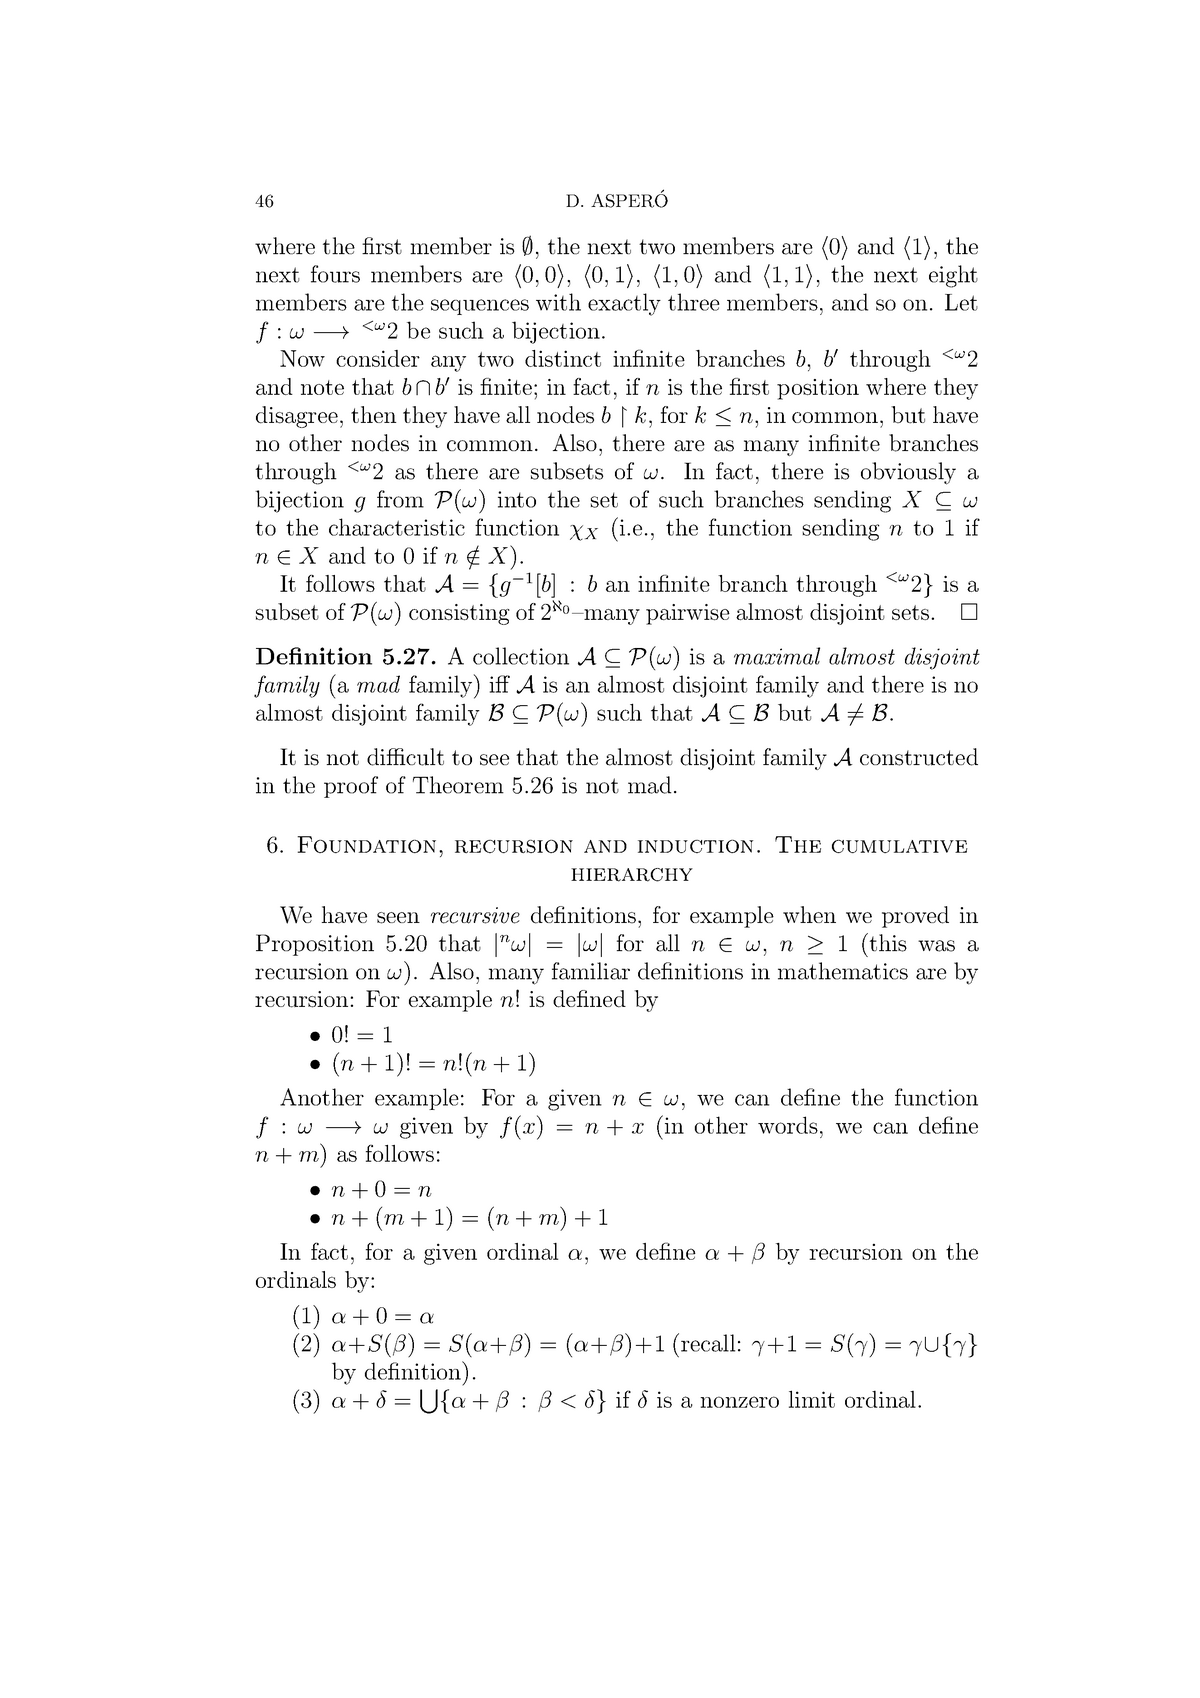 Chapter 06 Foundation, recursion and induction. The cumulative ...